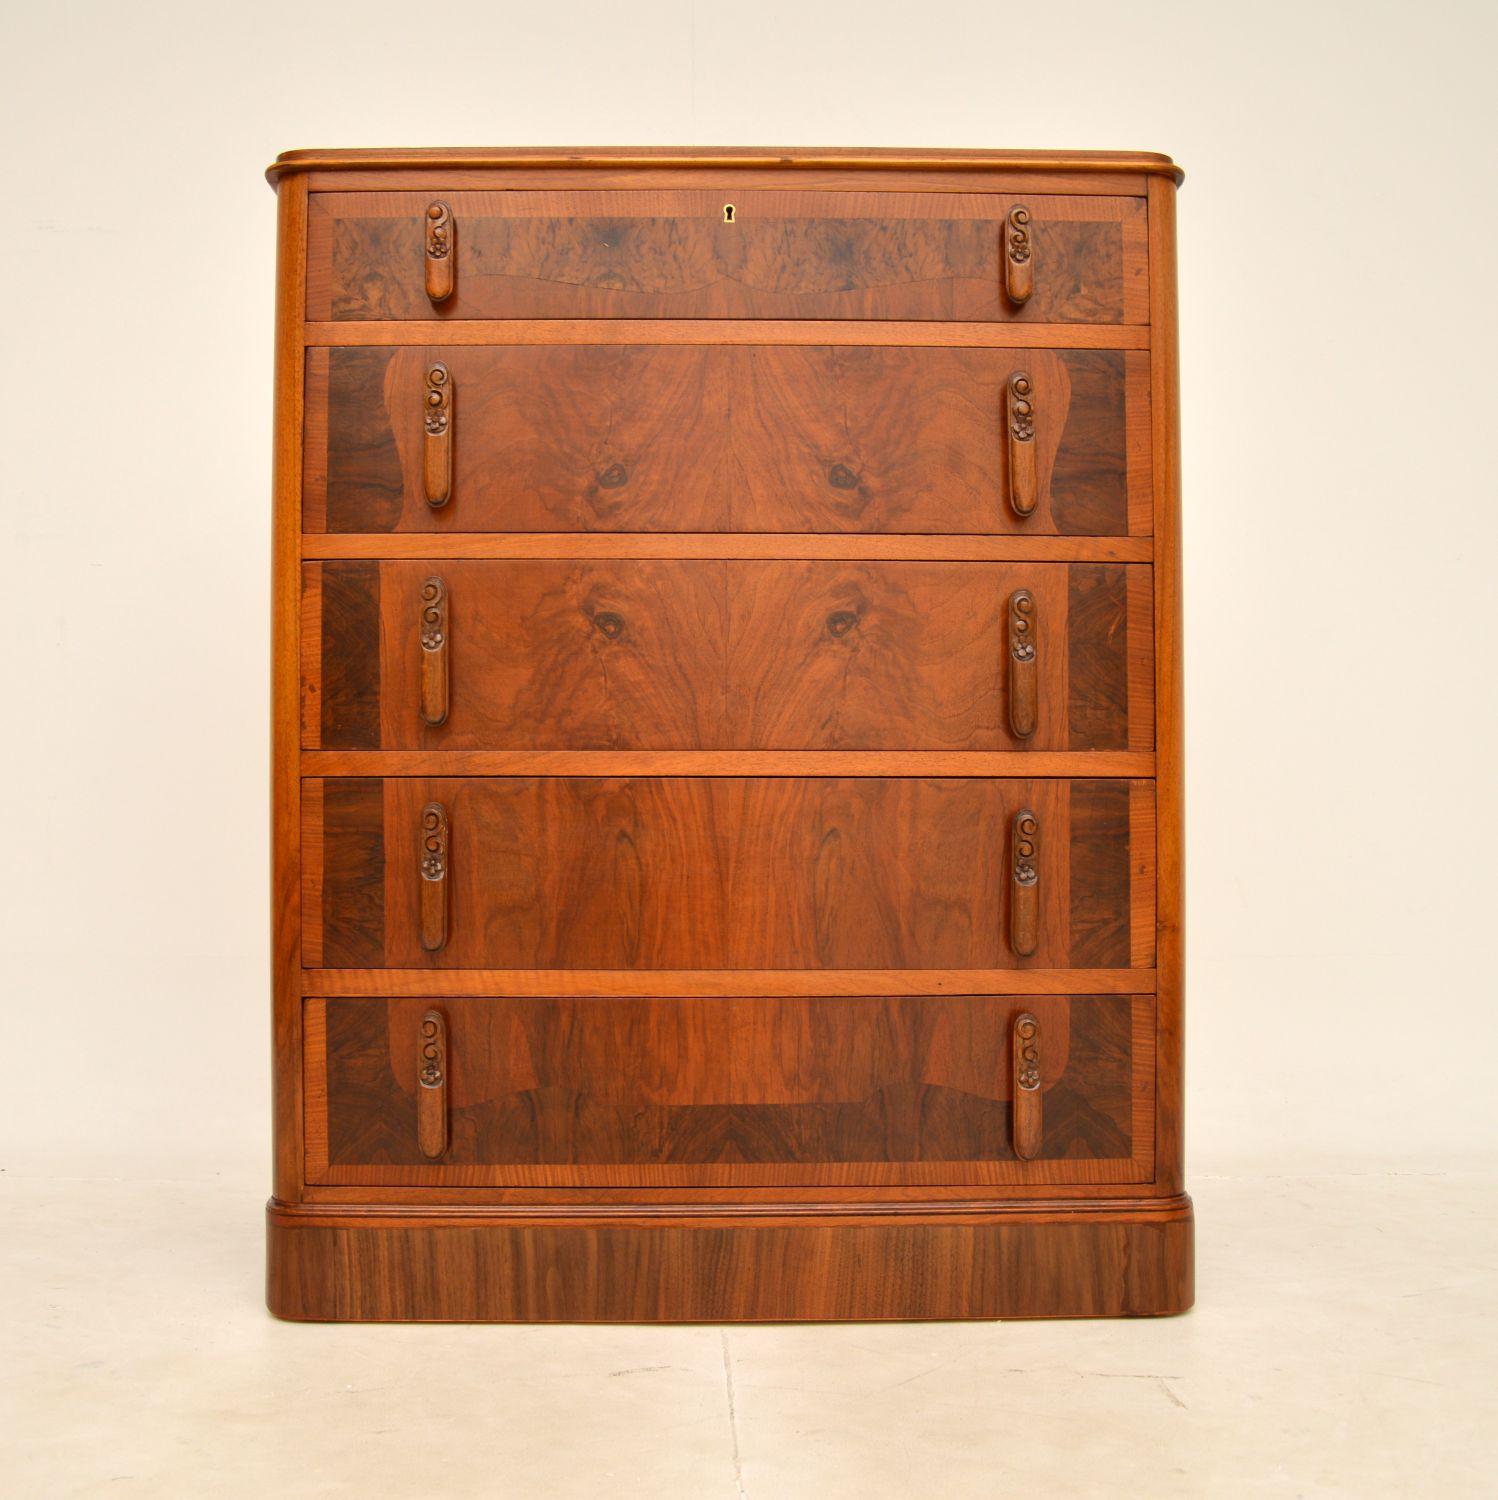 A smart and extremely well made Art Deco chest of drawers in walnut. This was made in England, it dates from around the 1930's.

It is of superb quality, the drawer fronts have gorgeous contrasting patterns of figured and burr walnut. The handles